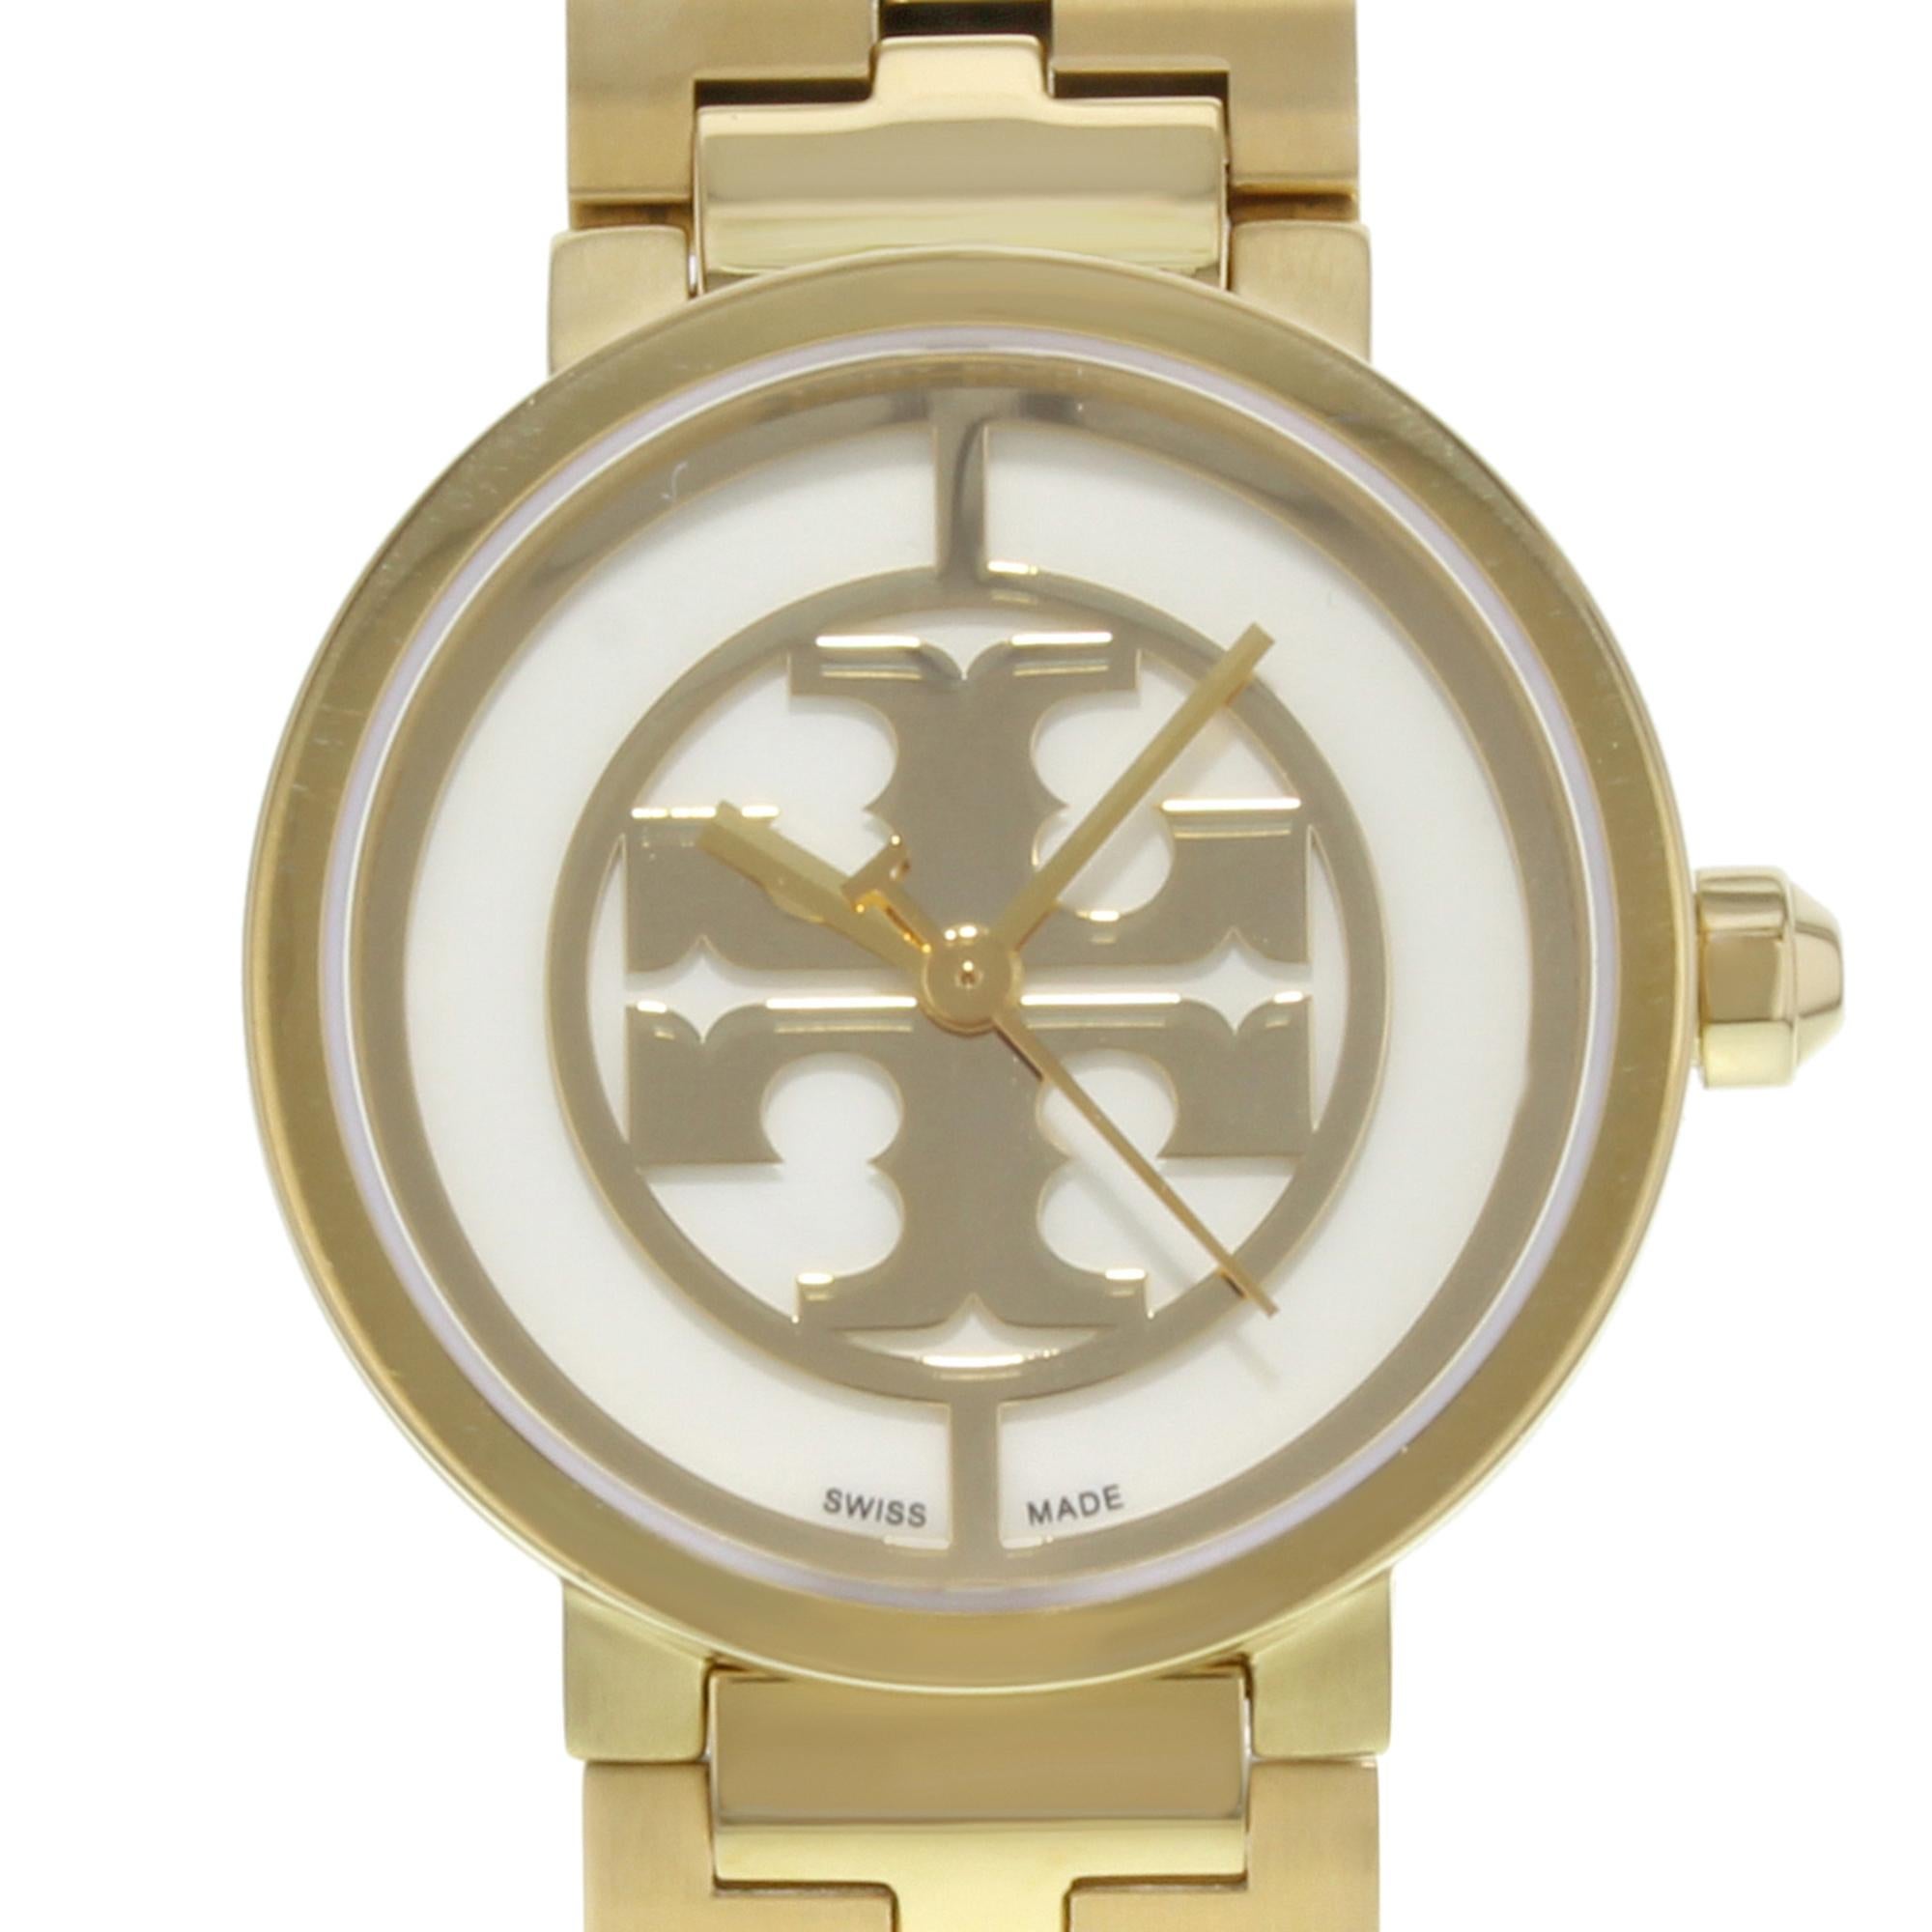 This pre-owned Tory Burch Reva TRB4011 is a beautiful Ladies timepiece that is powered by a quartz movement which is cased in a stainless steel case. It has a round shape face, dial and has hand unspecified style markers. It is completed with a